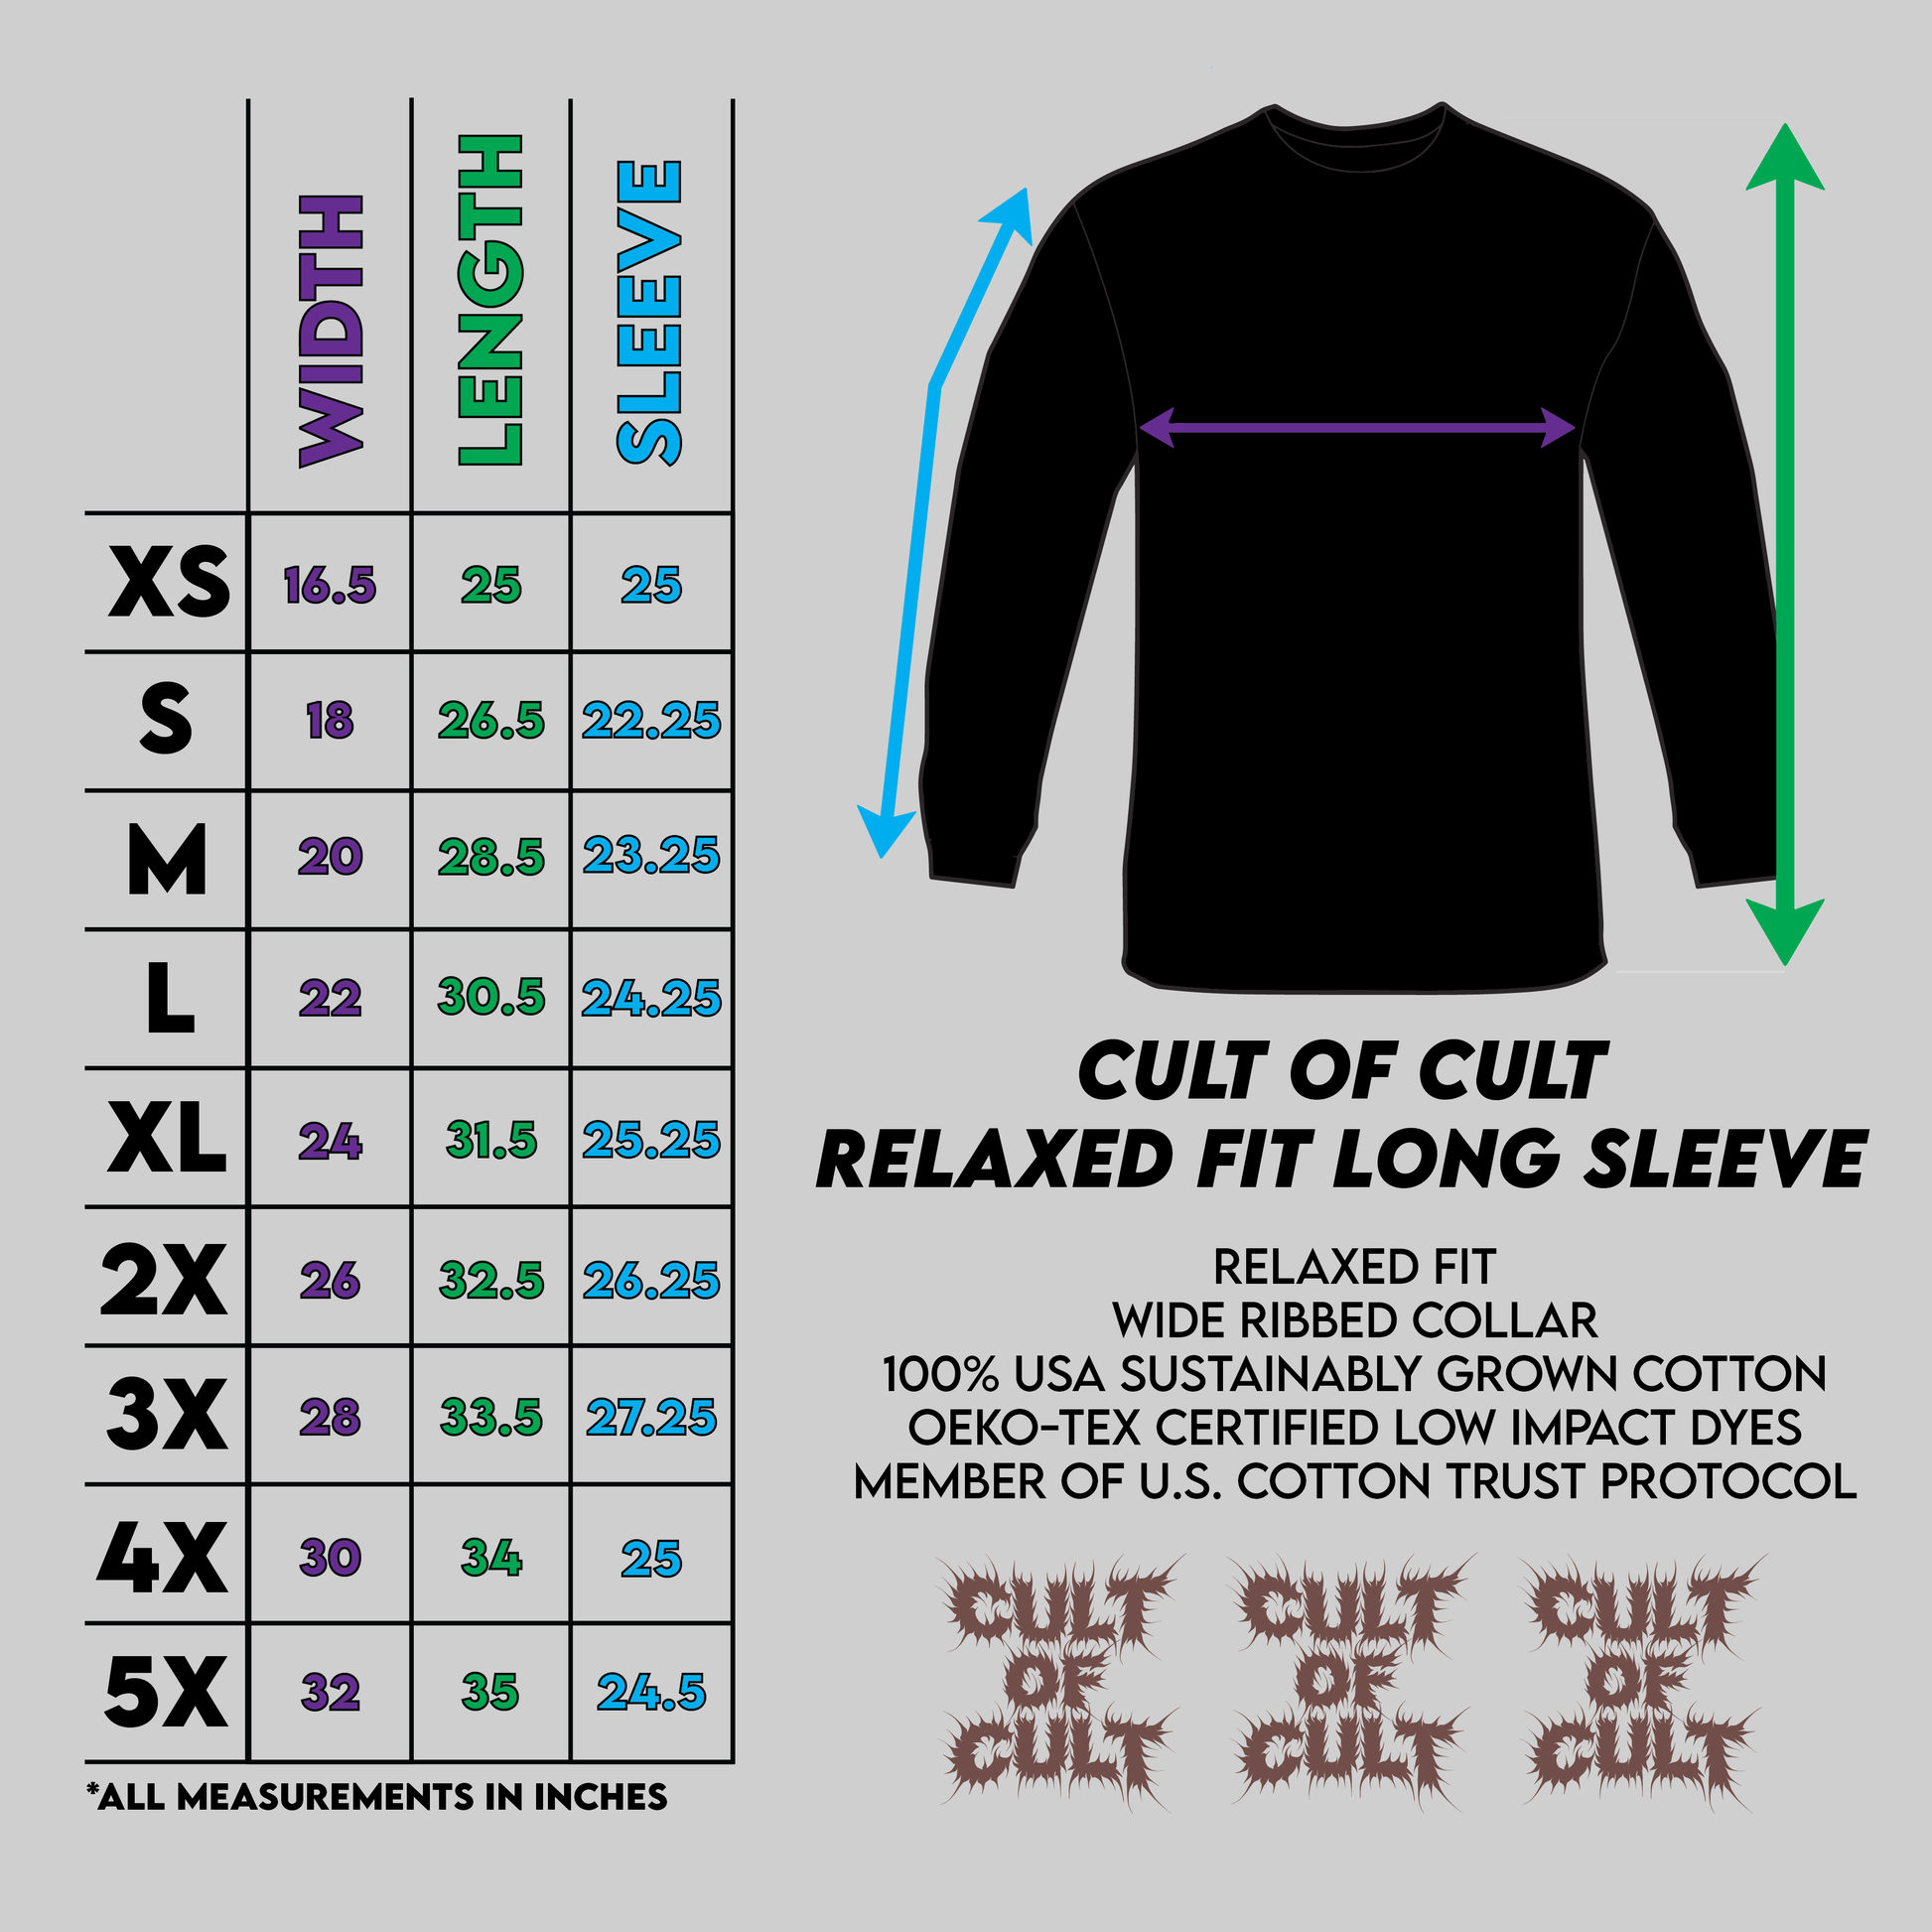 long sleeve sizing chart for Cult of Cult shirts